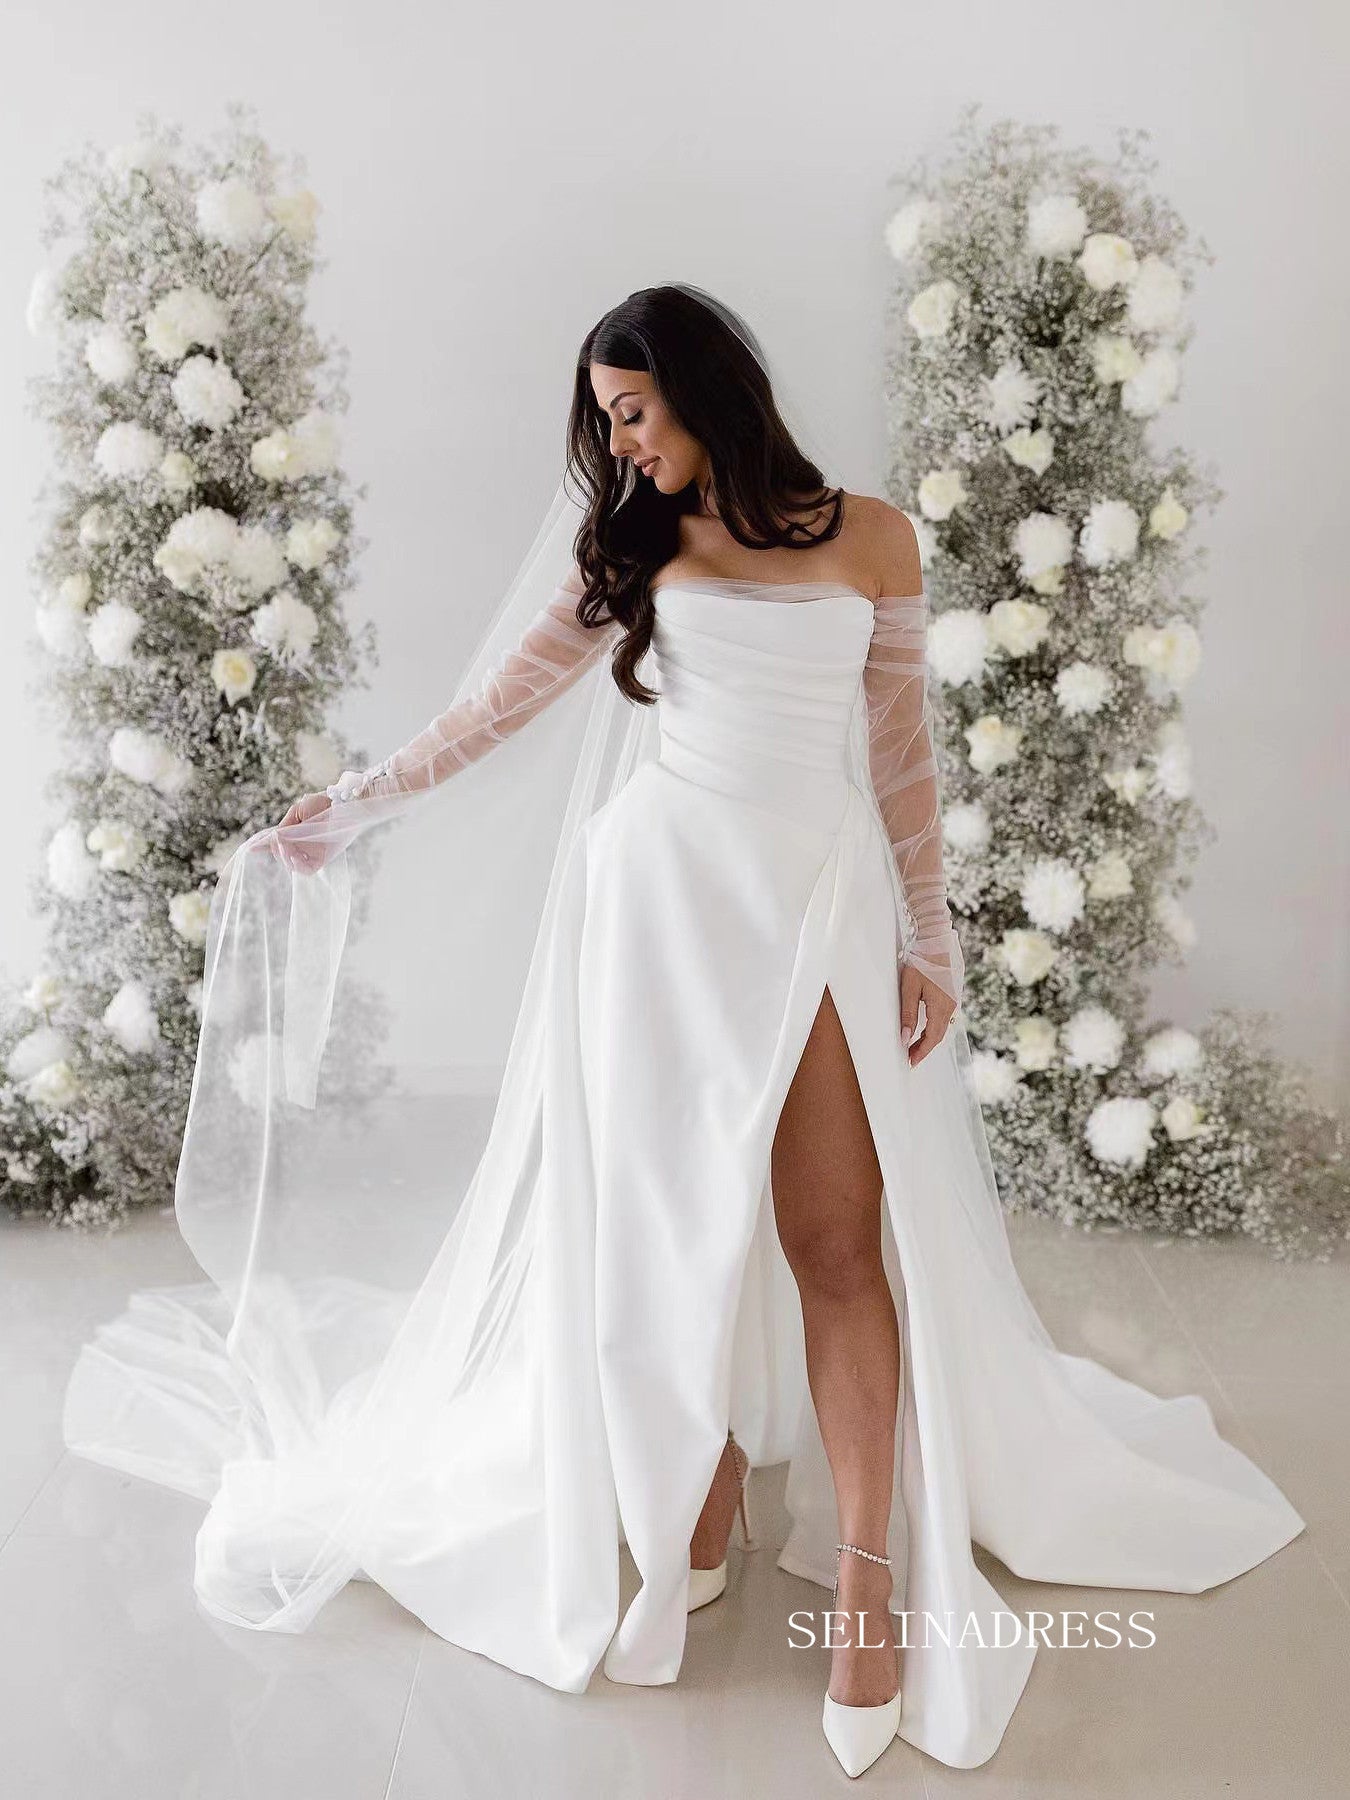 Wedding Dresses & Bridal Gowns - Largest Selection at Kleinfeld Bridal |  Kleinfeld Bridal